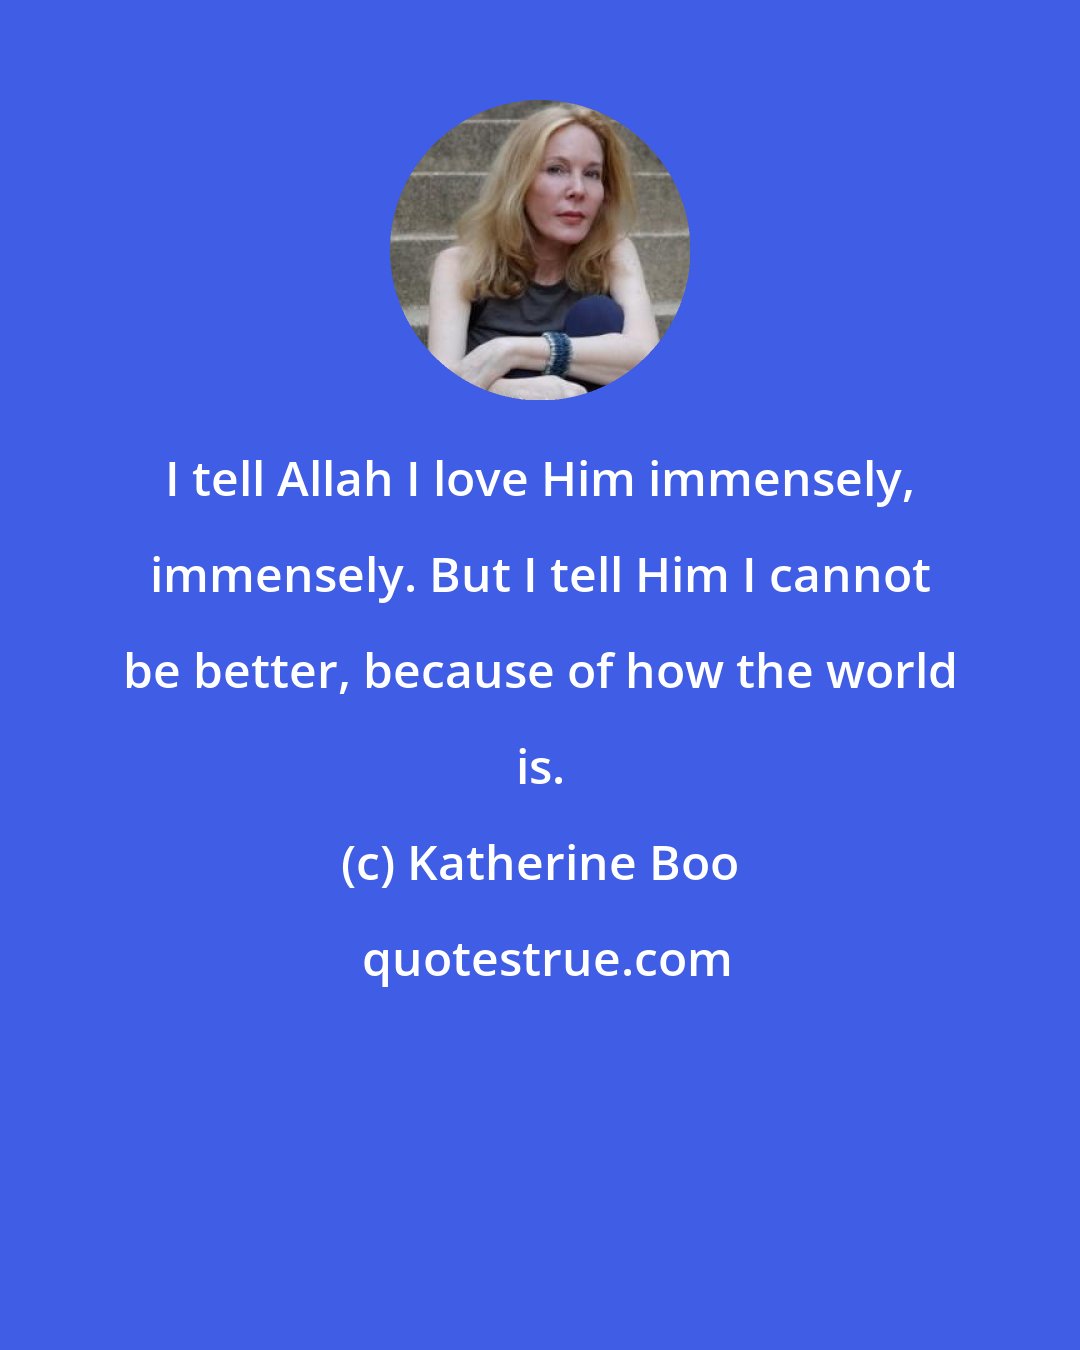 Katherine Boo: I tell Allah I love Him immensely, immensely. But I tell Him I cannot be better, because of how the world is.